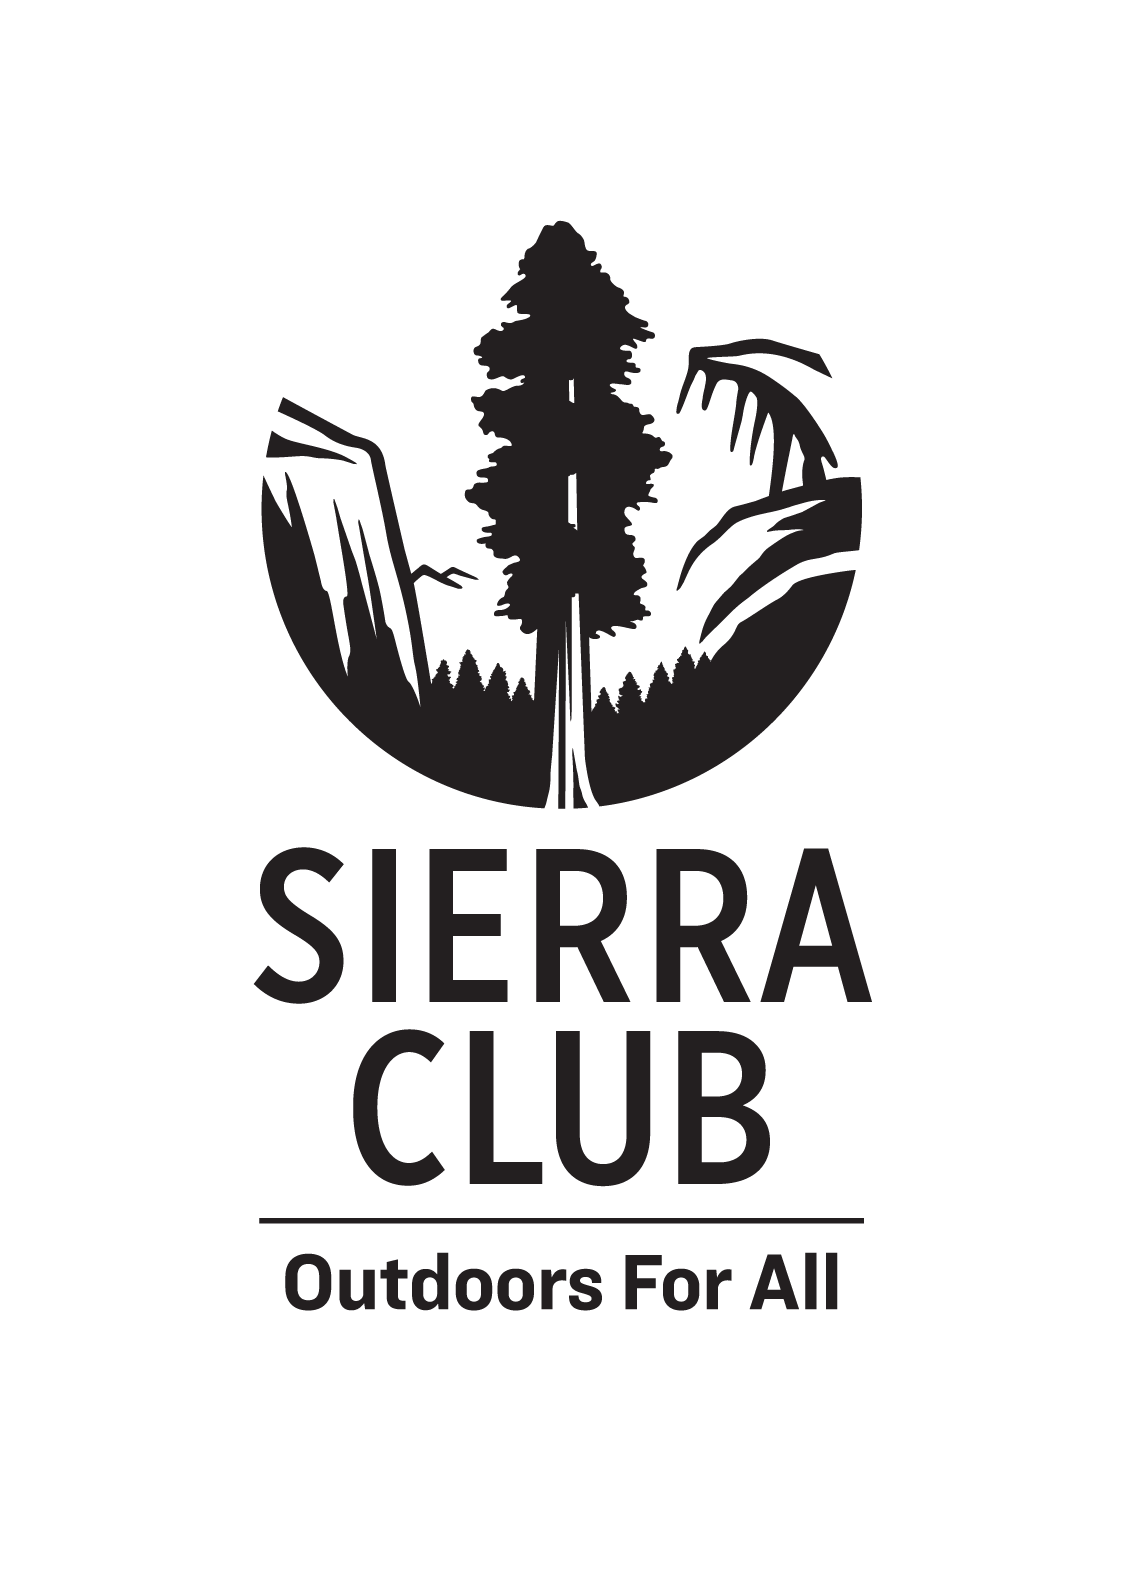 SIERRA CLUB Outdoors For All